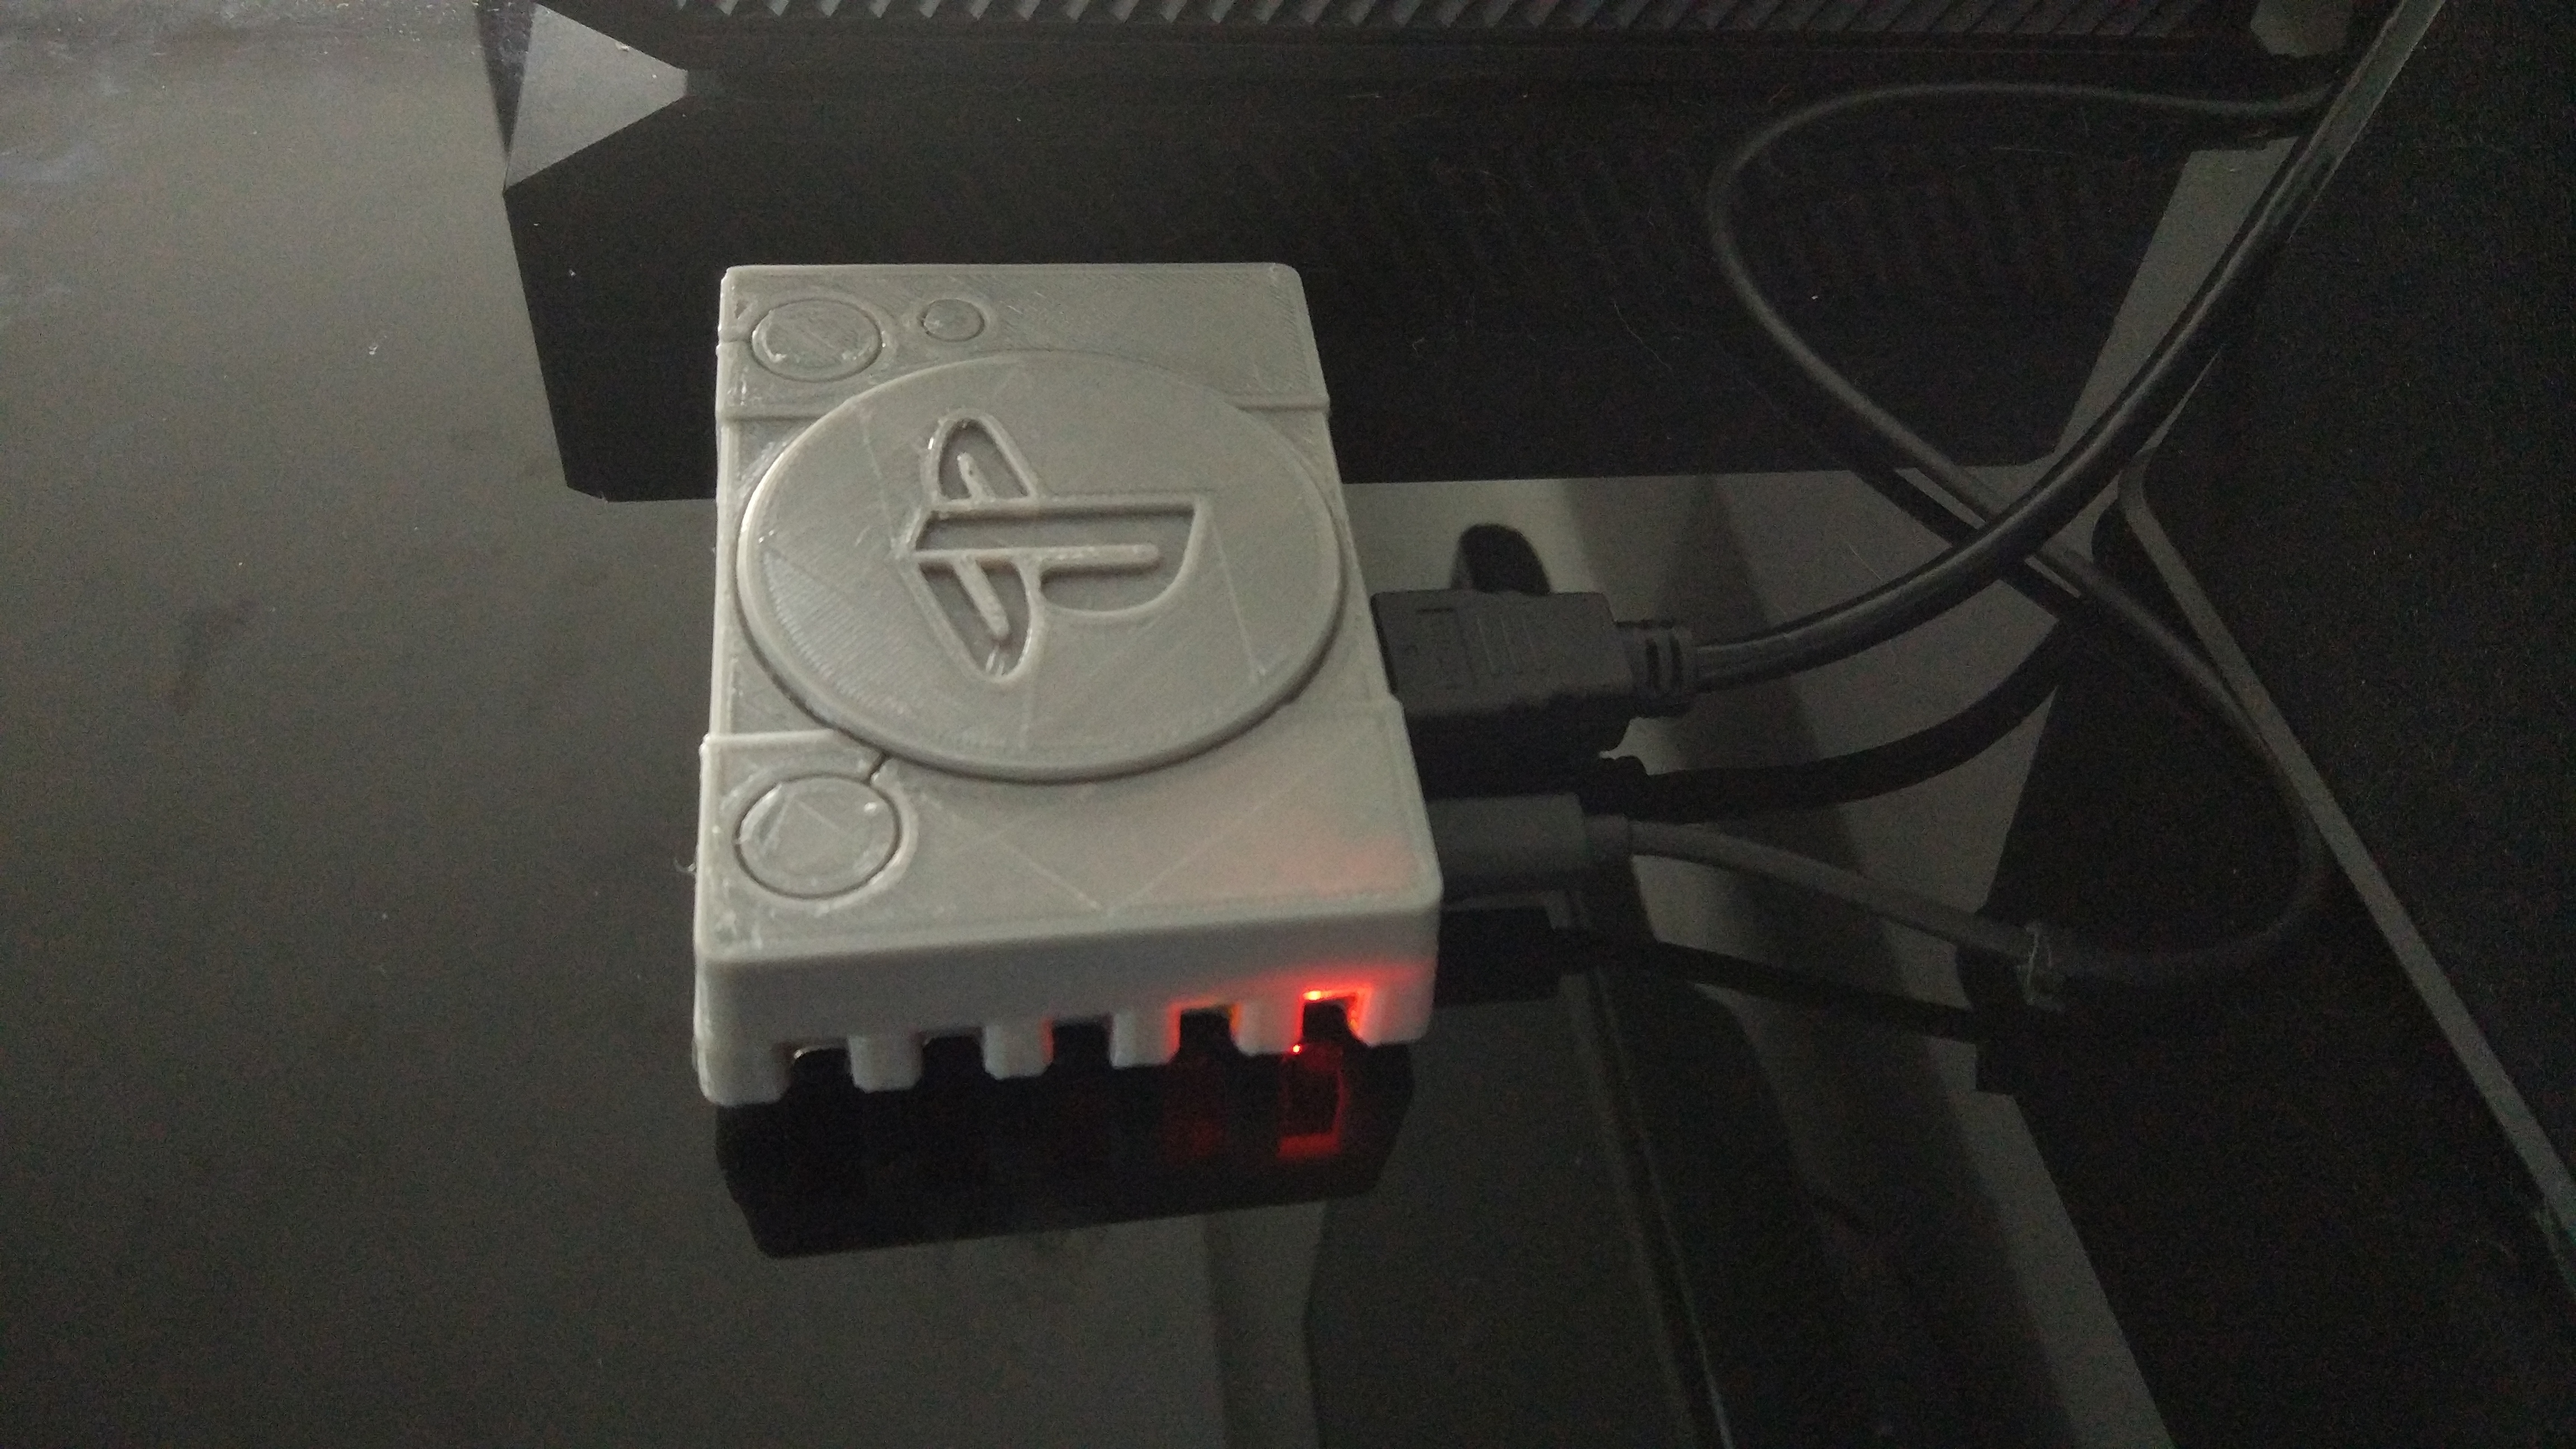 digtere Inspicere Døde i verden 3D Printed Raspberry pi playstation case by Filipe Campos | Pinshape